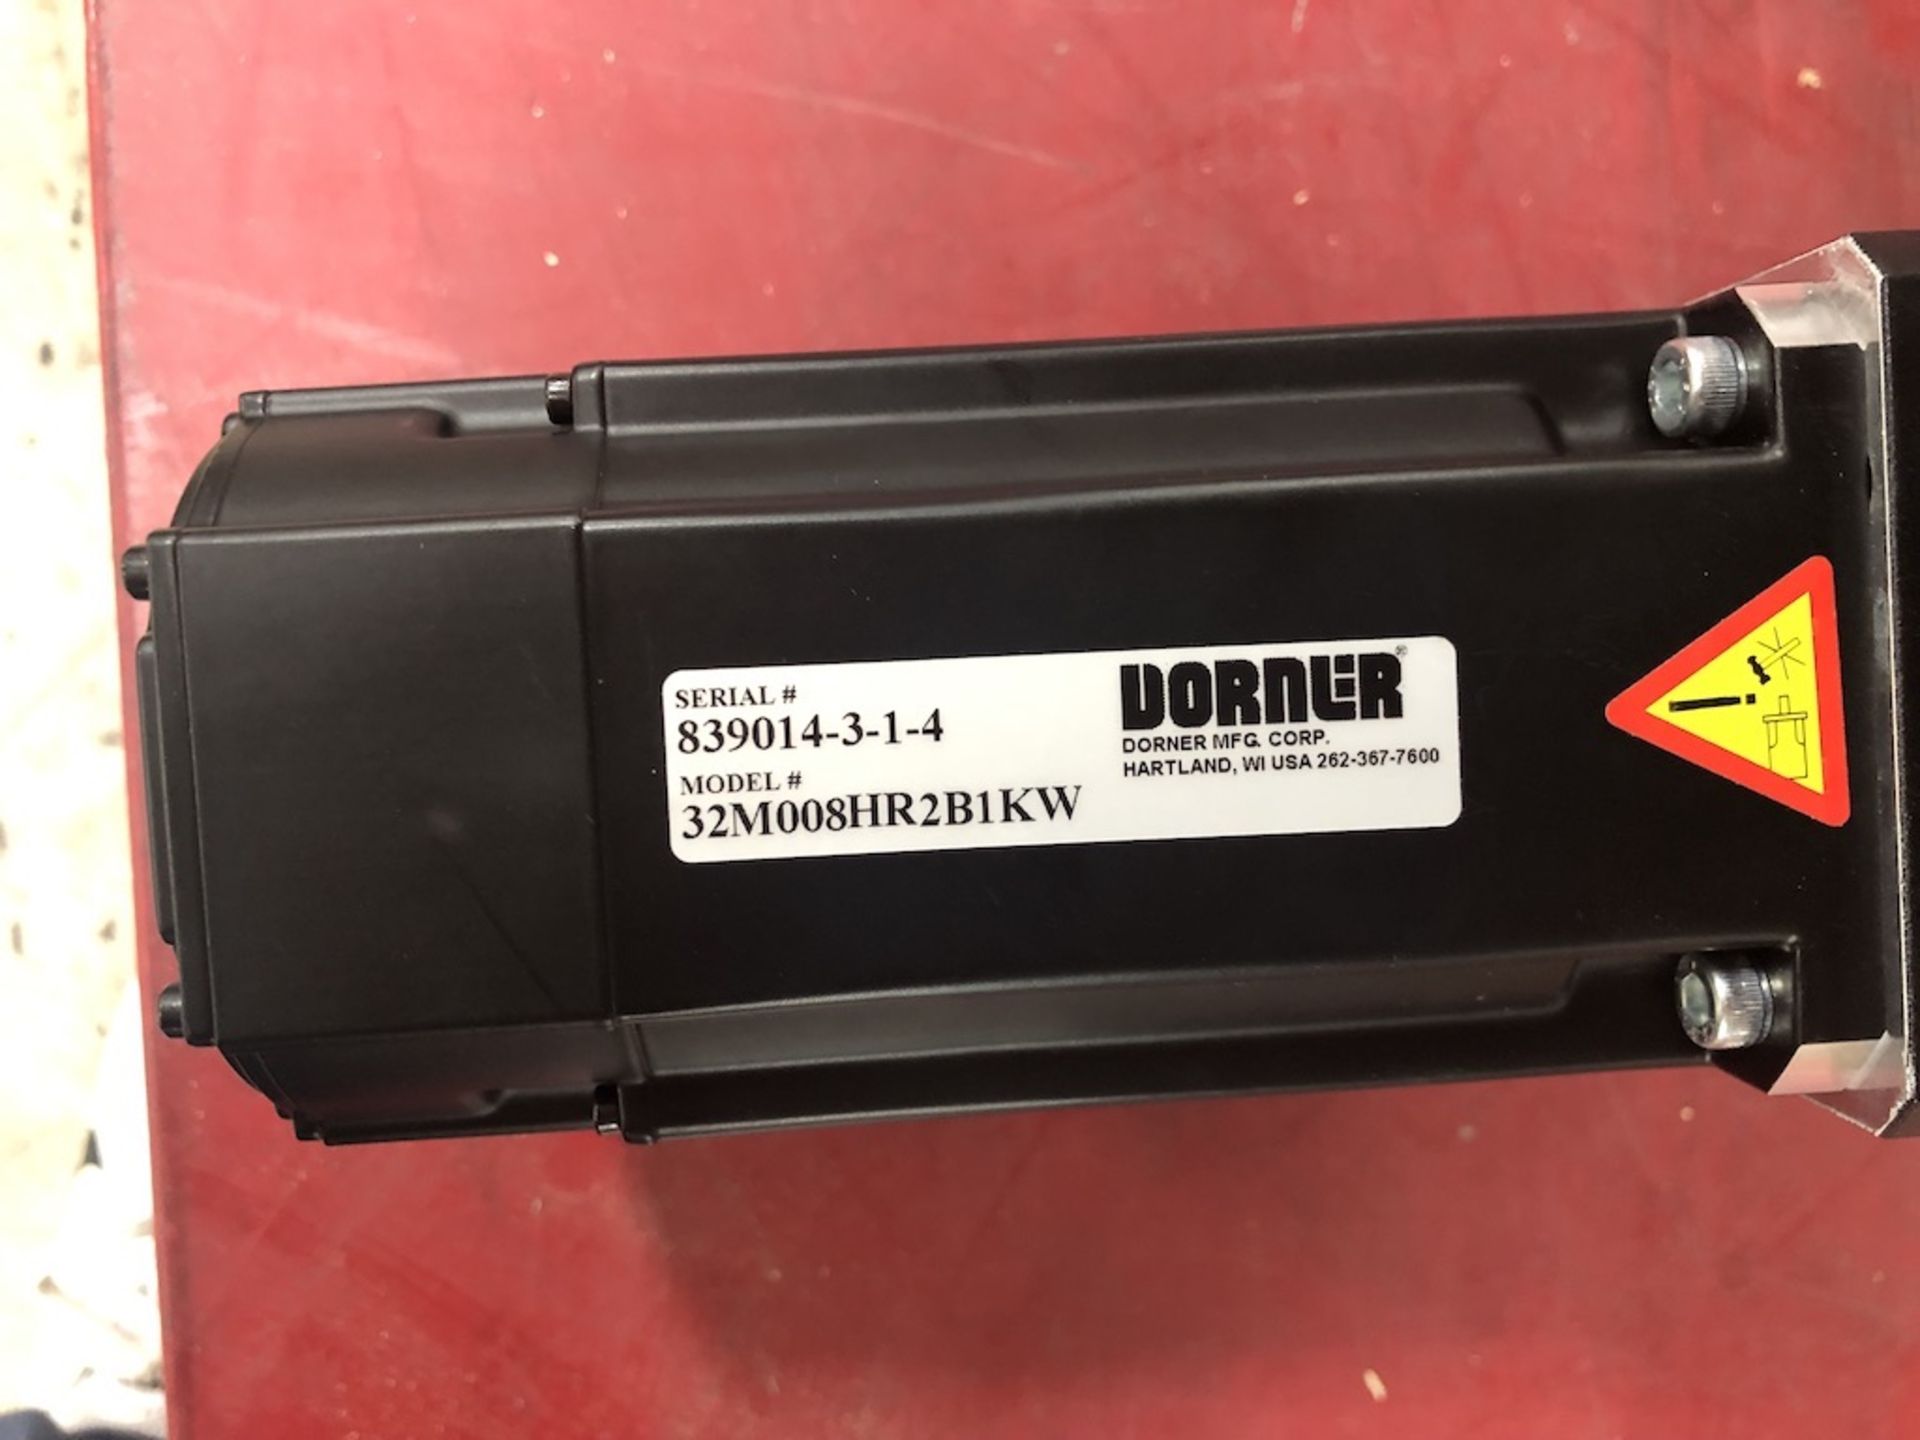 ( NEW IN BOX ) DORNER 3200 & 5200 SERIES TOP MOUNT PARALLEL DRIVE PACKAGE FOR STANDARD LOAD 60 HZ - Image 5 of 9